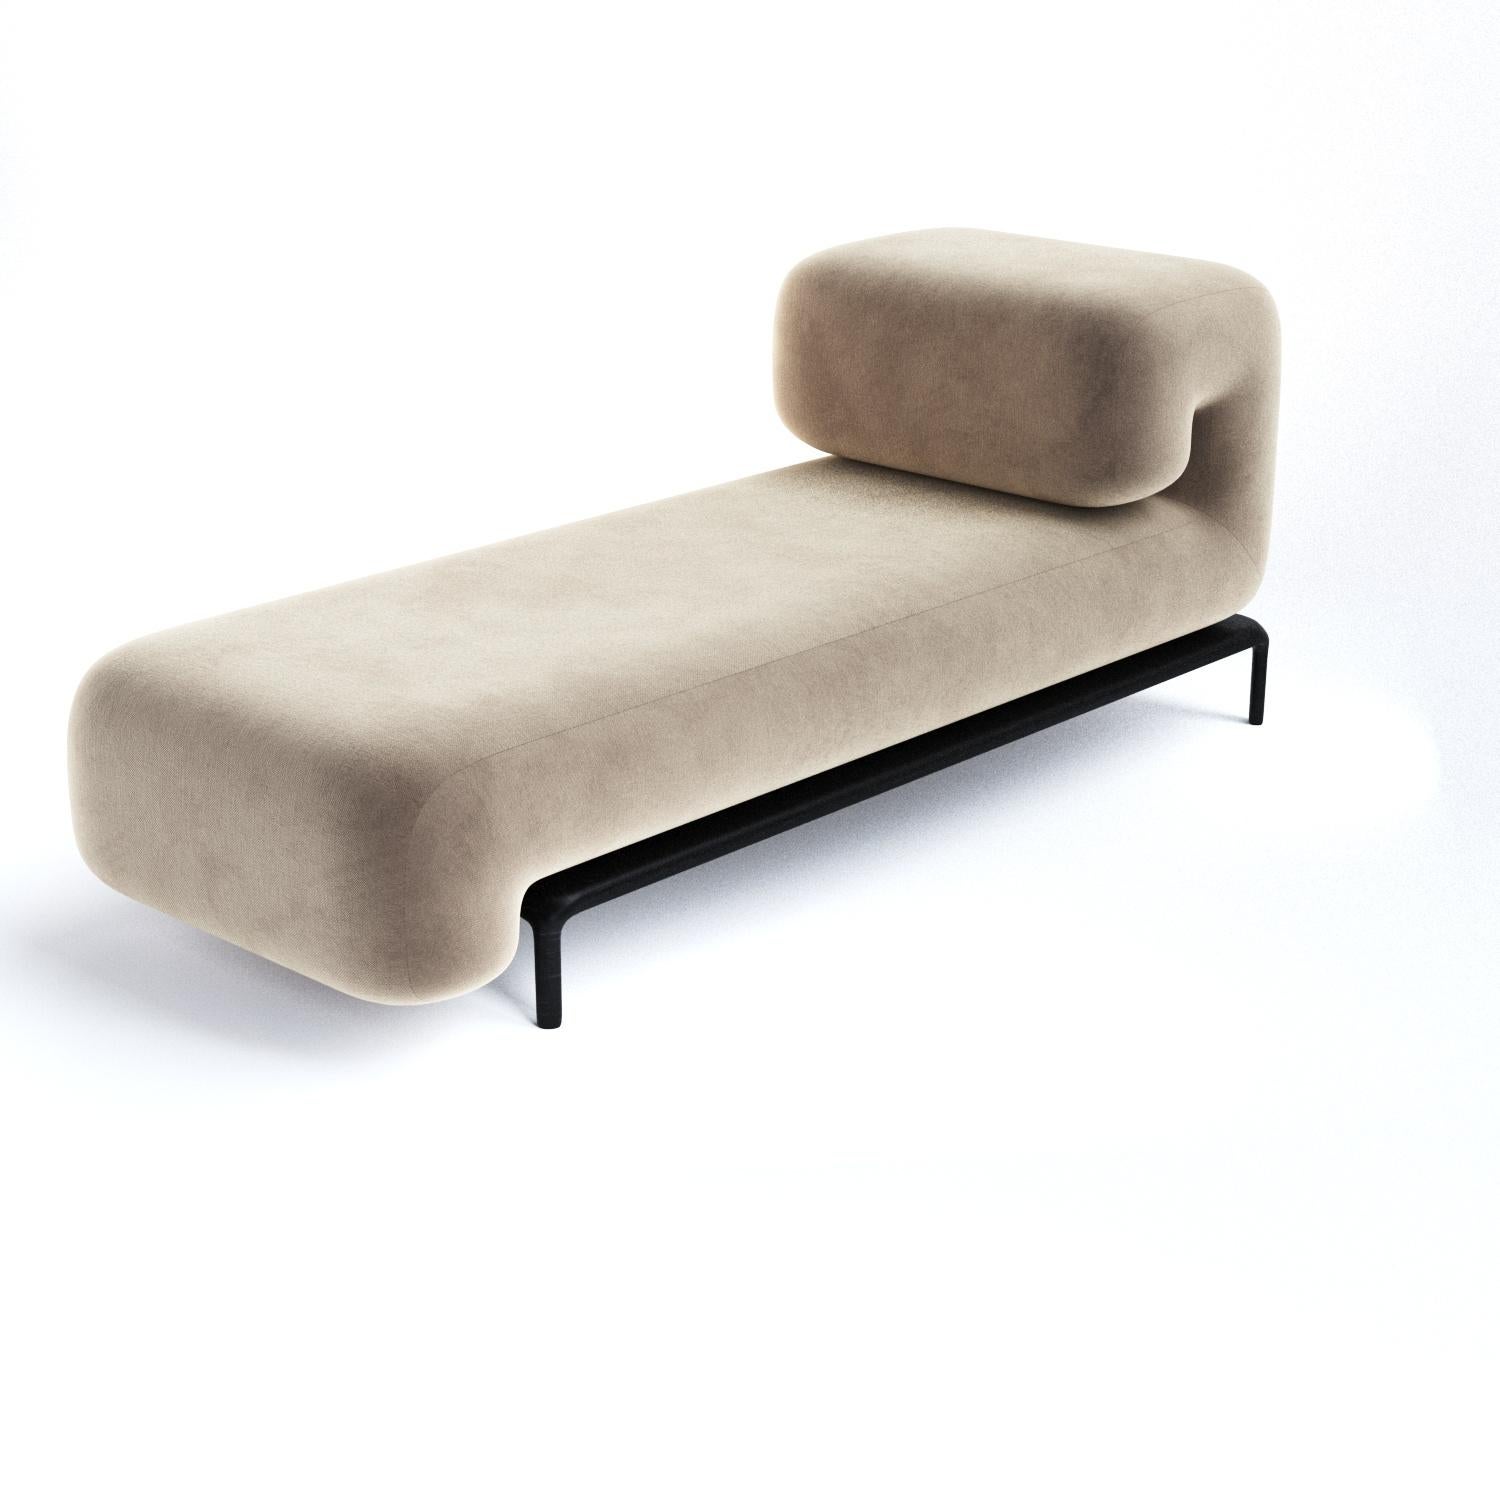 Padun sofa module 3 by FAINA
THE SOFA MODULE 3 IS THE BROWN ONE ONLY
Sets are avaliable. Please contact us
Design: Victoriya Yakusha
Materials: Textile, foam rubber, sintepon, wood
Dimensions: 80 x 195 x H 90 cm

In search of new-old design